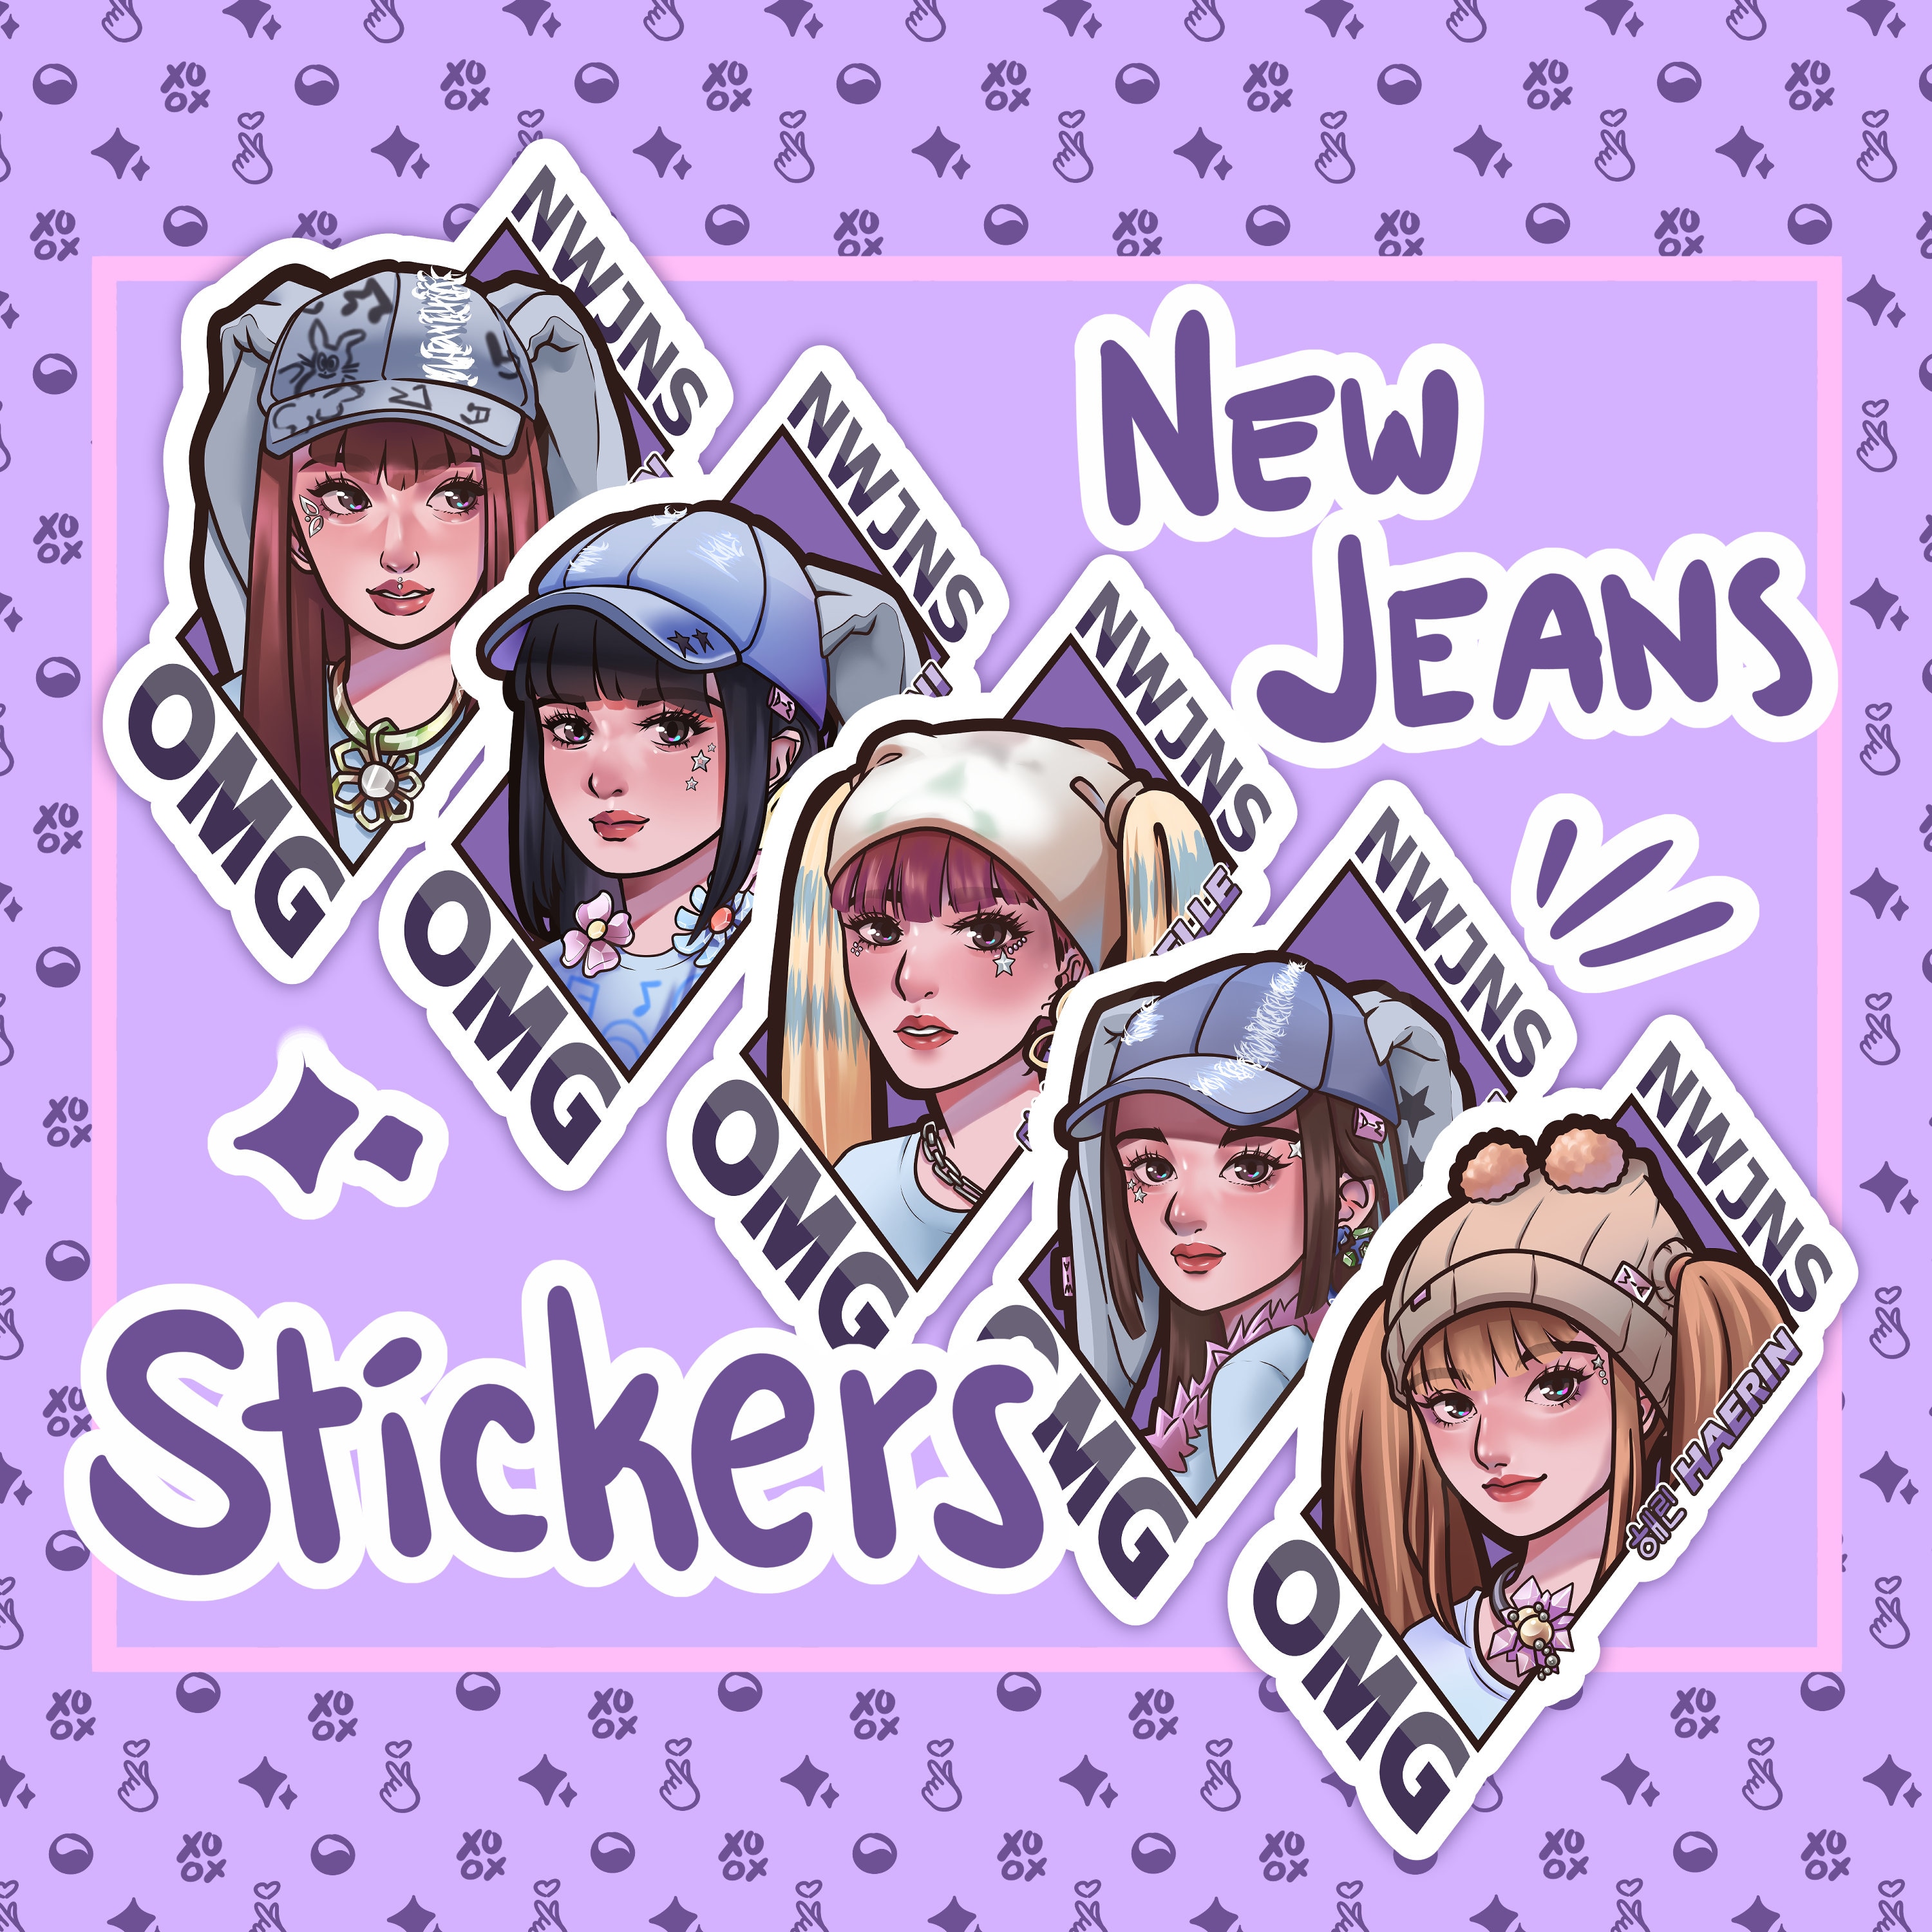 New Jeans Stickers, 103 Assorted New Jeans Stickers, New Jeans Super Shy  Stickers, New Jeans Get up Stickers, Kpop Sticker, New Jeans 2023 